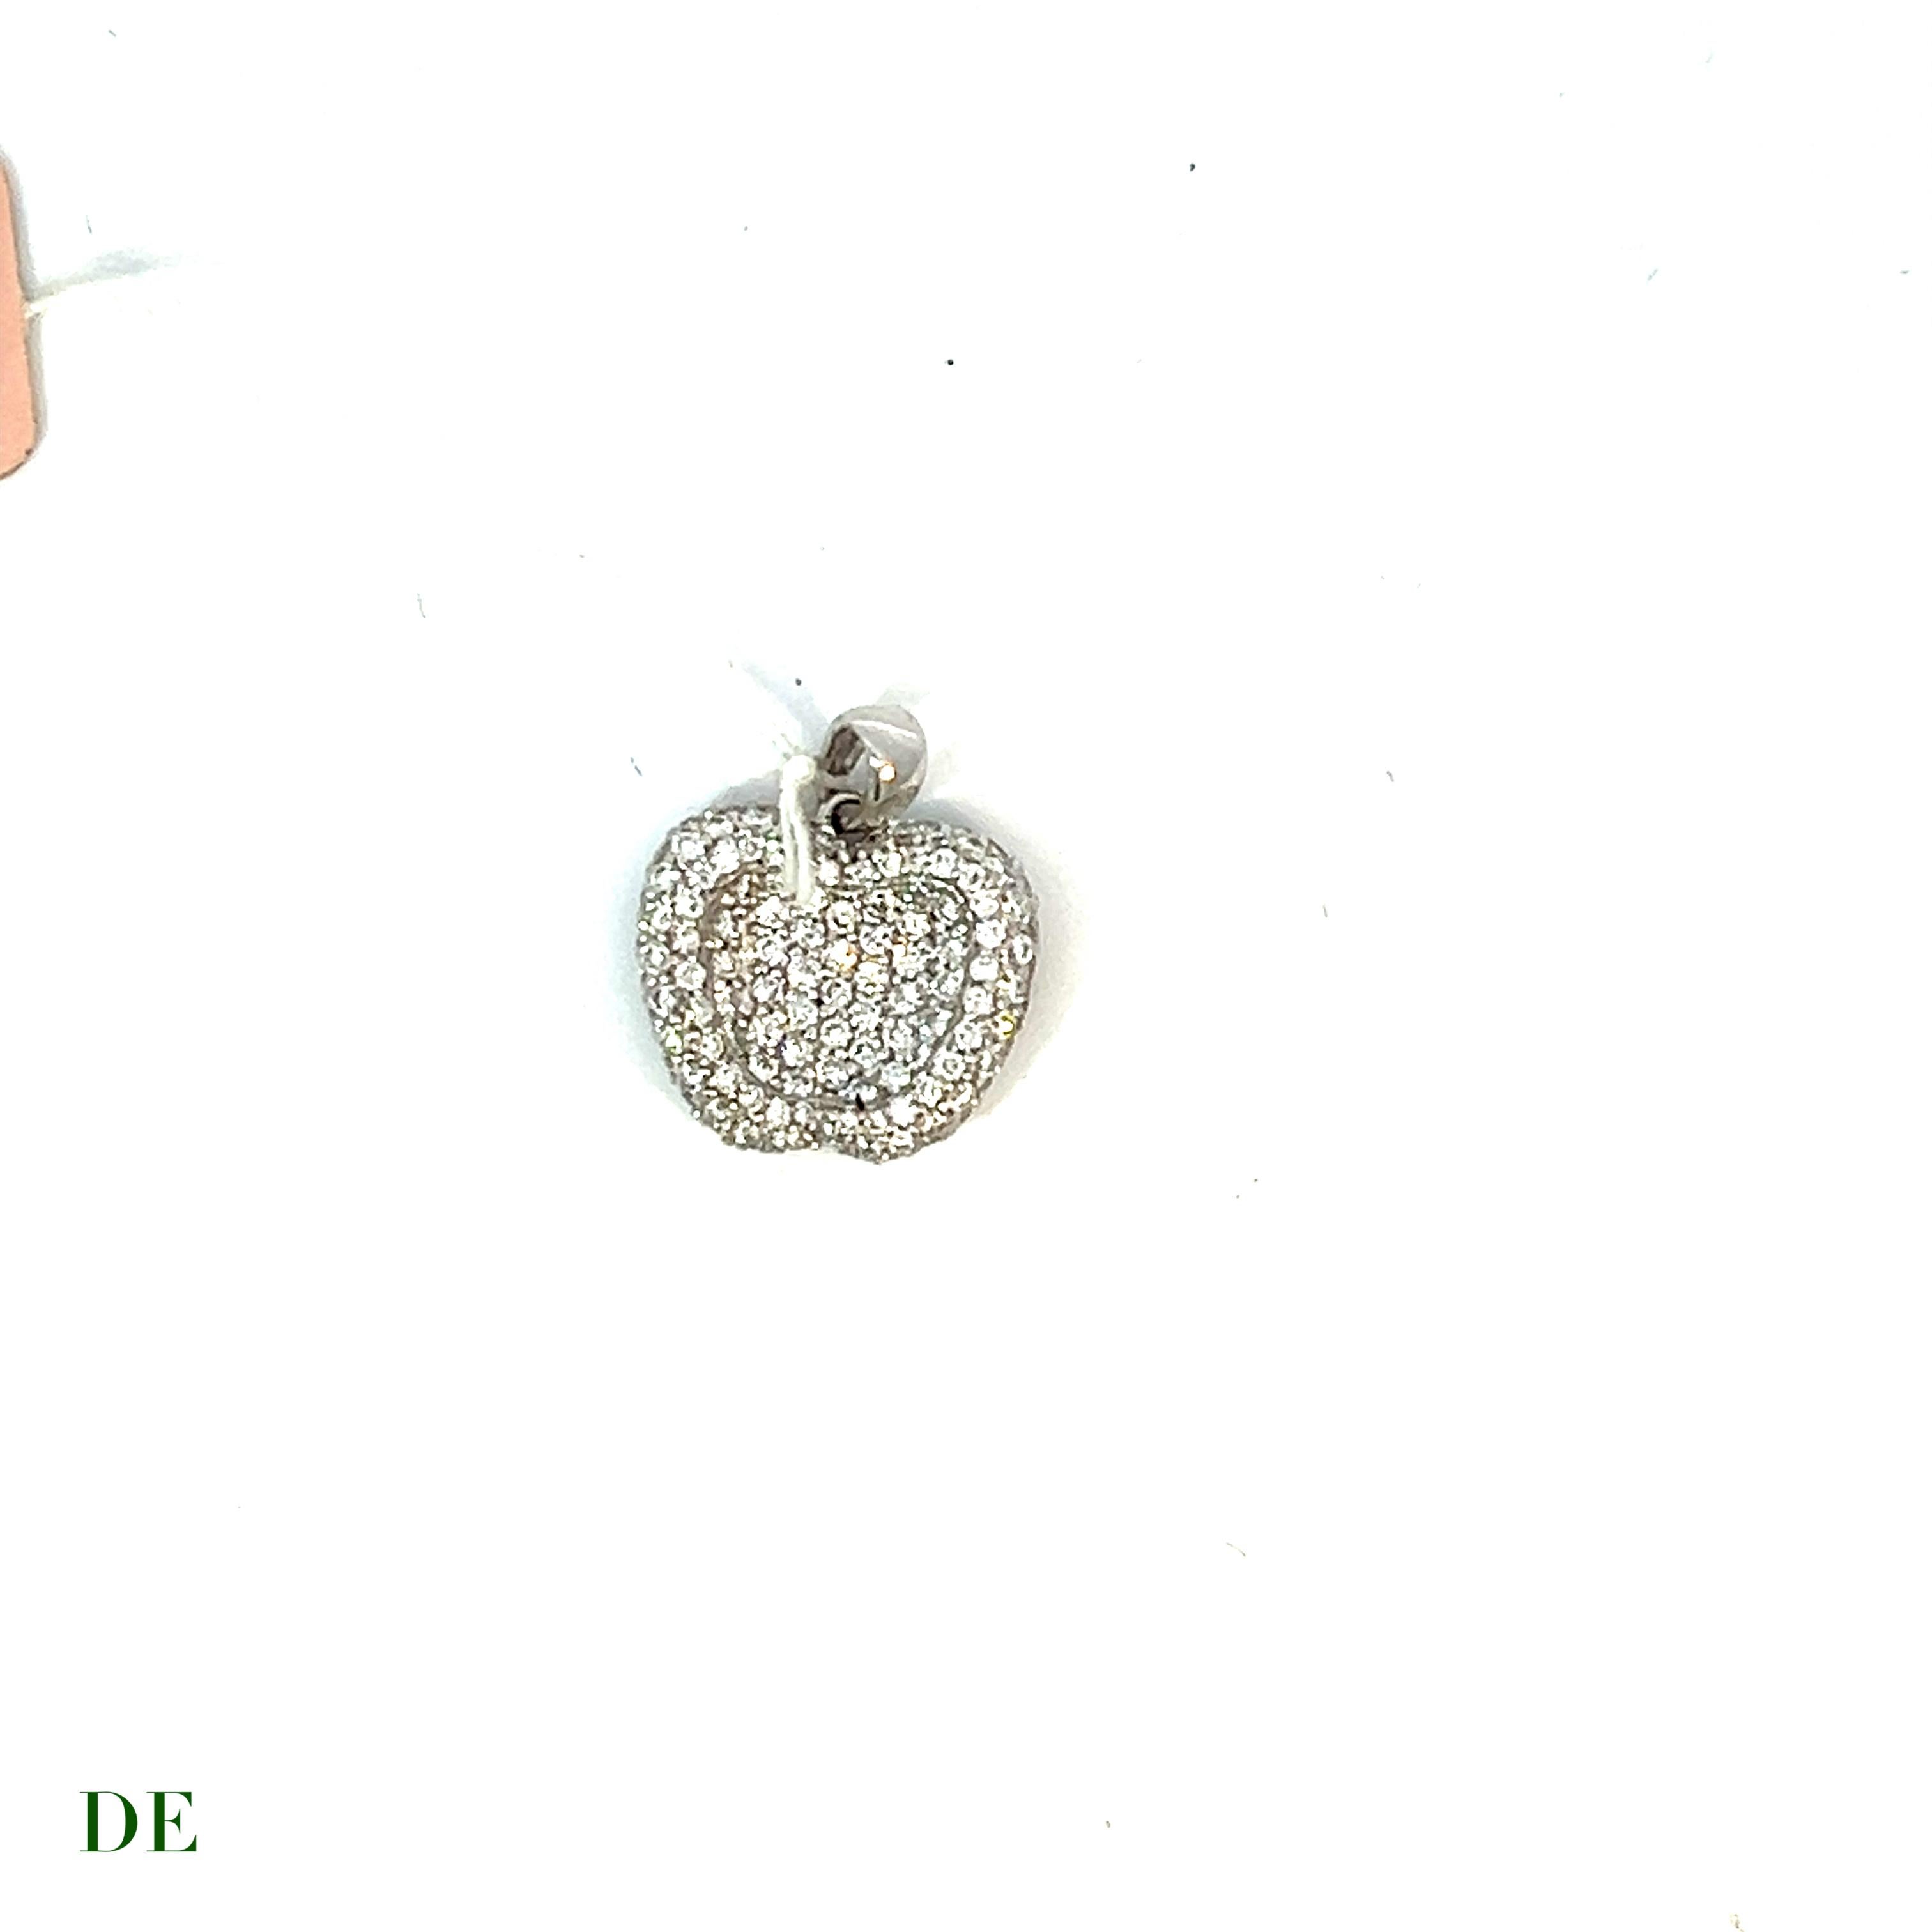 Embrace Timeless Beauty: Adam Eve Apple 18k Pendant with 1.44 ct Encrusted Diamonds

Experience the allure of timeless beauty with the Adam Eve Apple 18k Pendant. Inspired by the iconic story, this pendant features a captivating apple design adorned